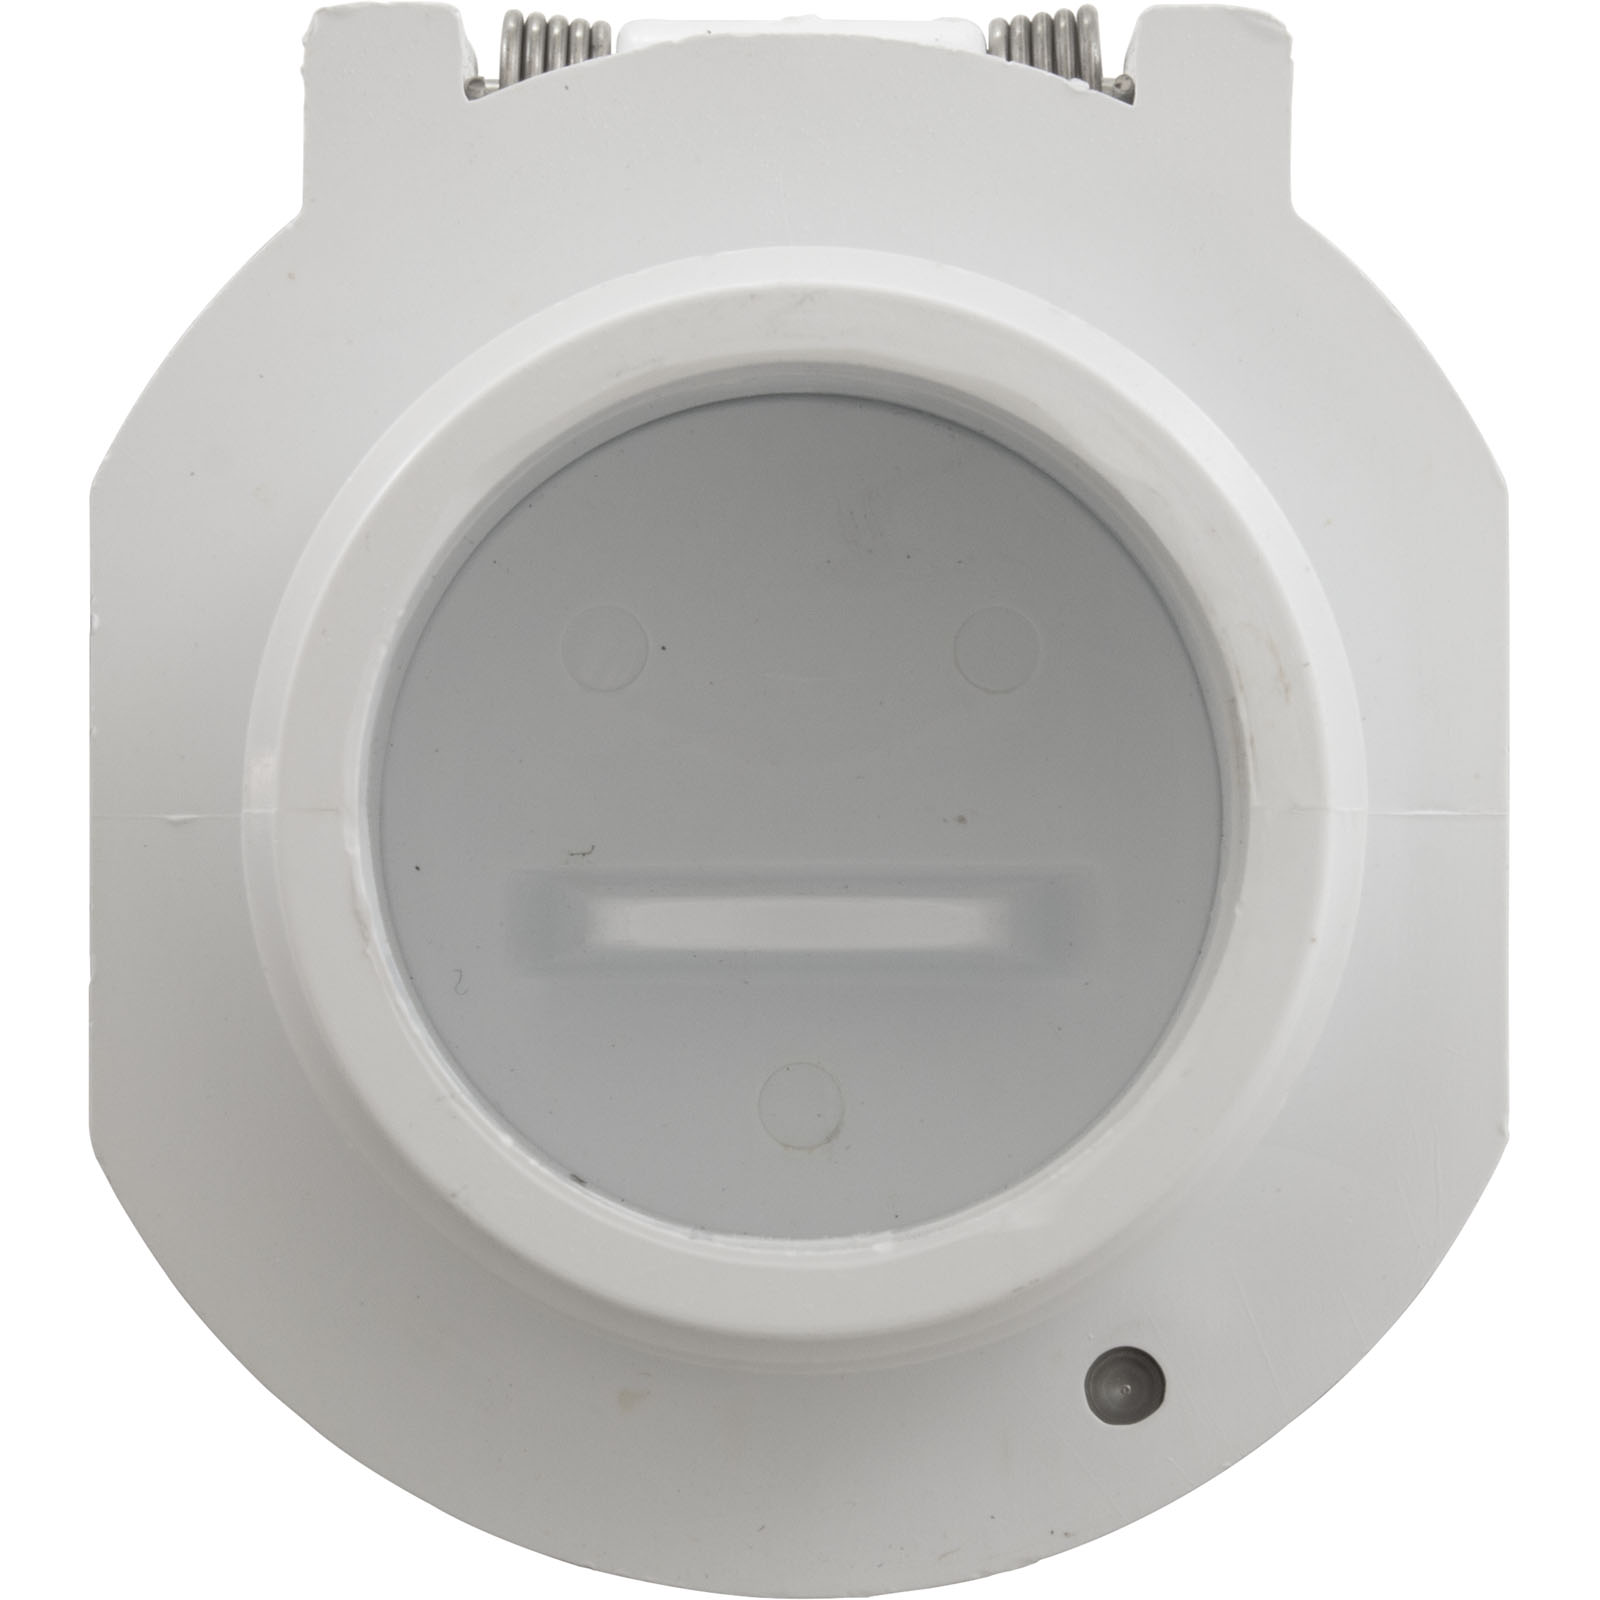 Picture of 25505-000-000 Vac Lock Cover White Generic